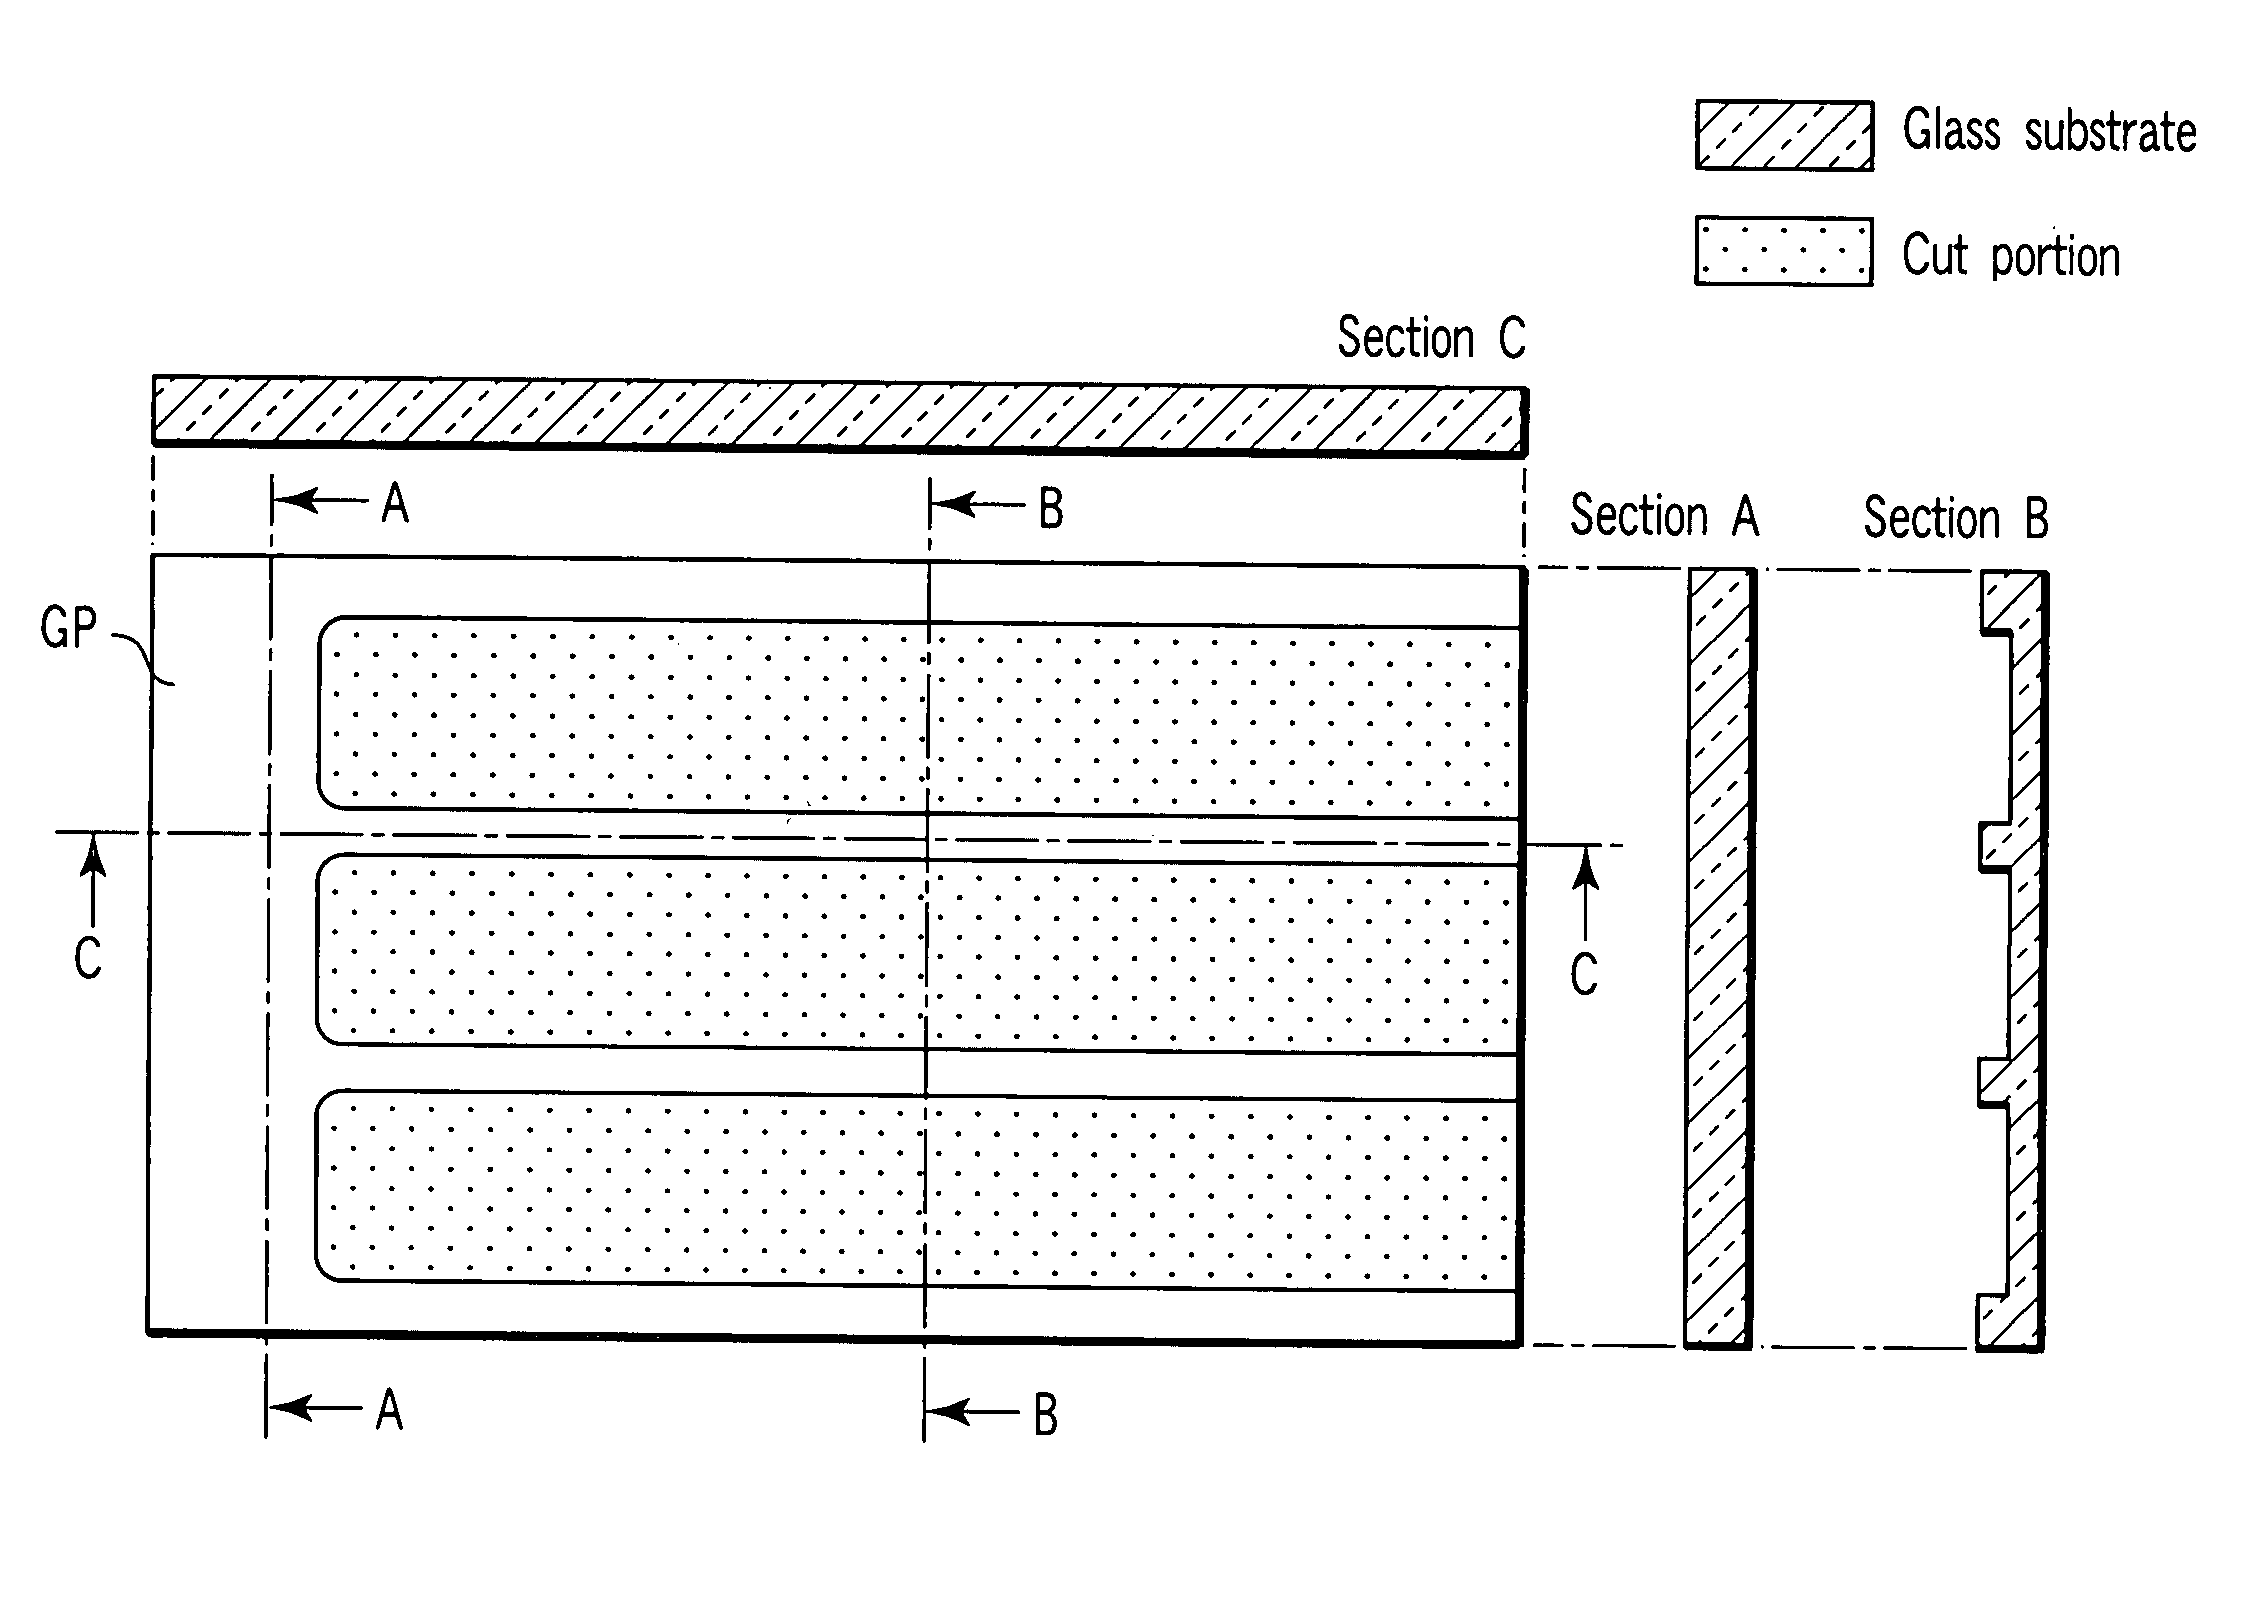 Specimen stage array for scanning probe microscope